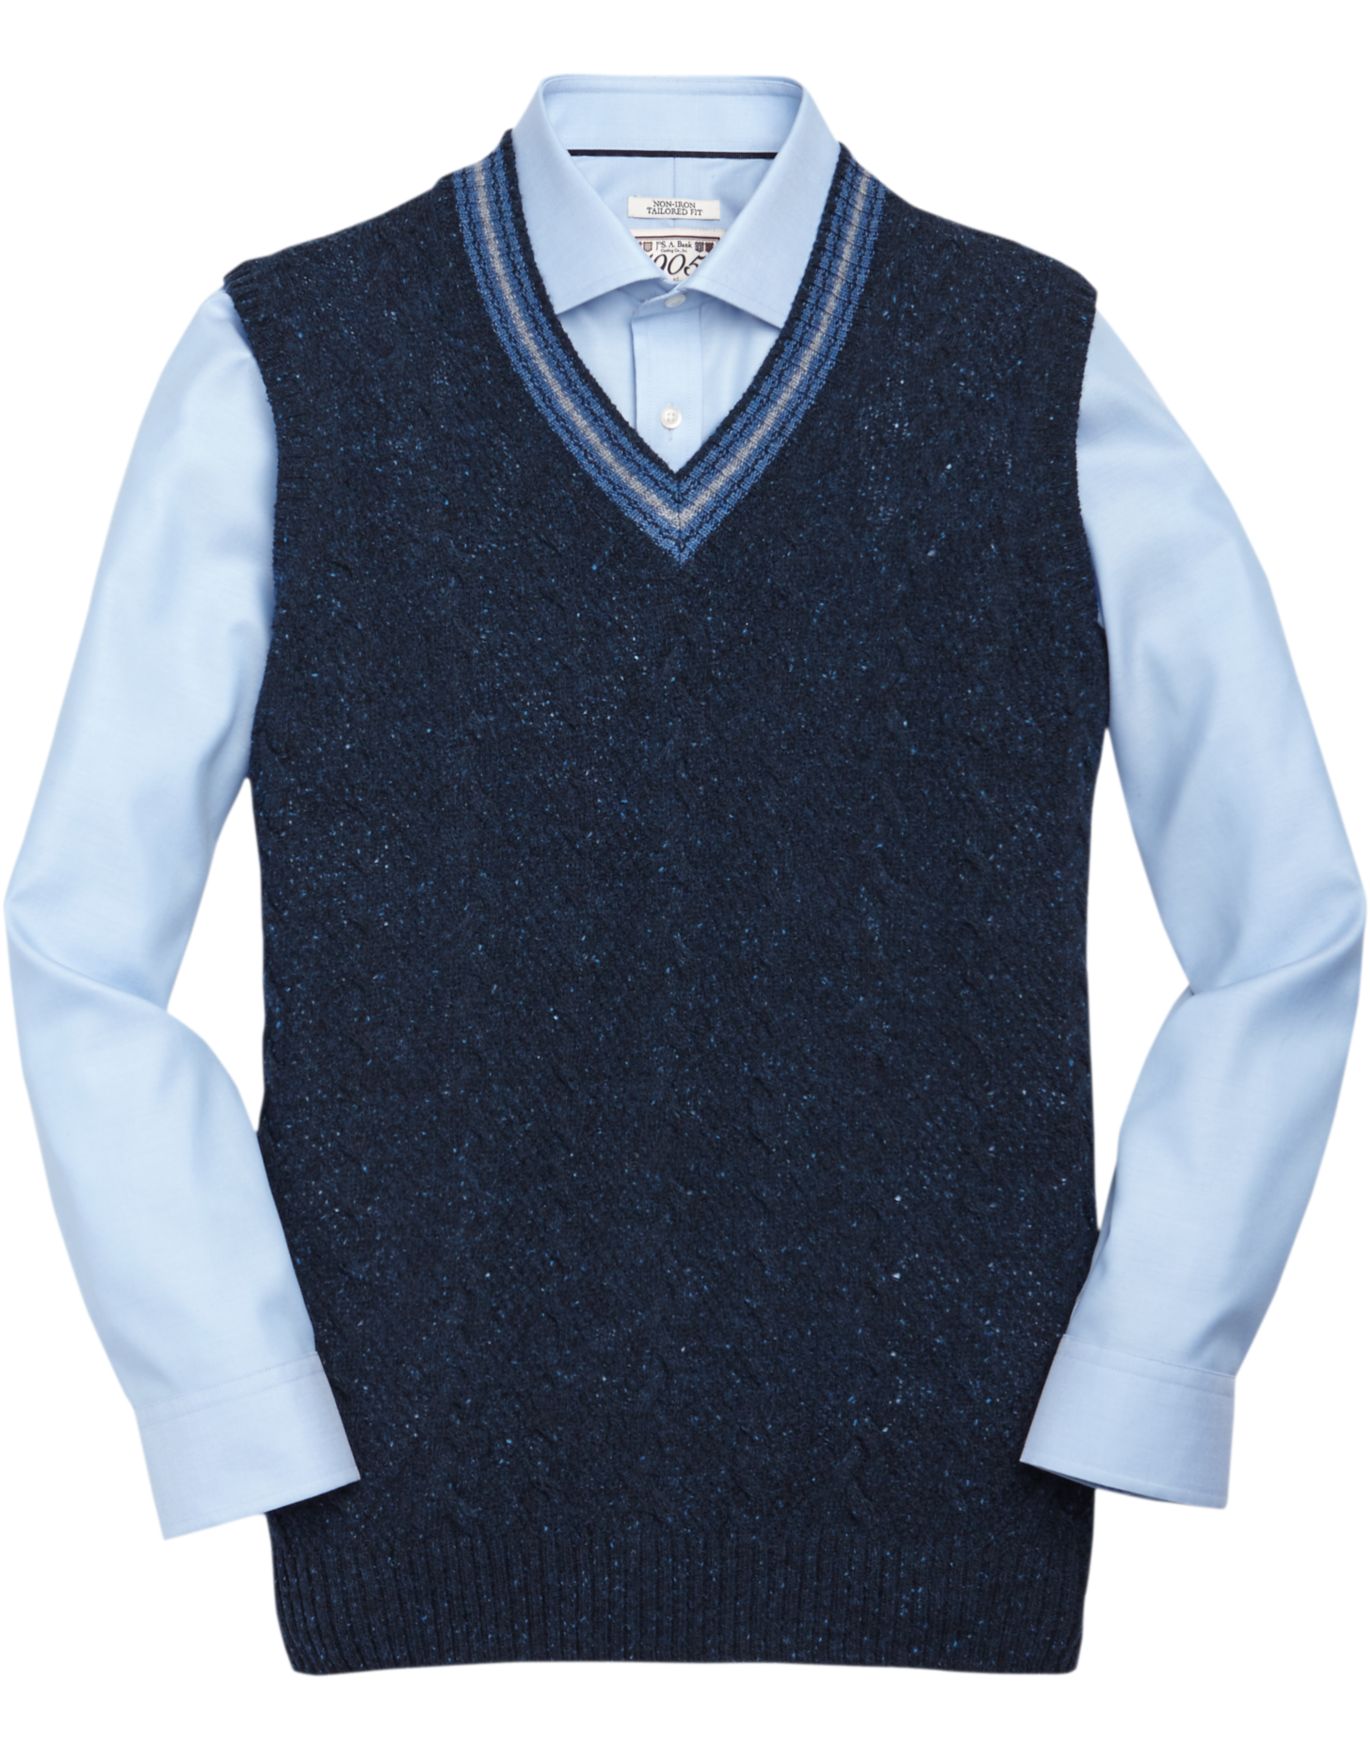 1905 Collection Lambswool Sweater Vest CLEARANCE - All Clearance ...